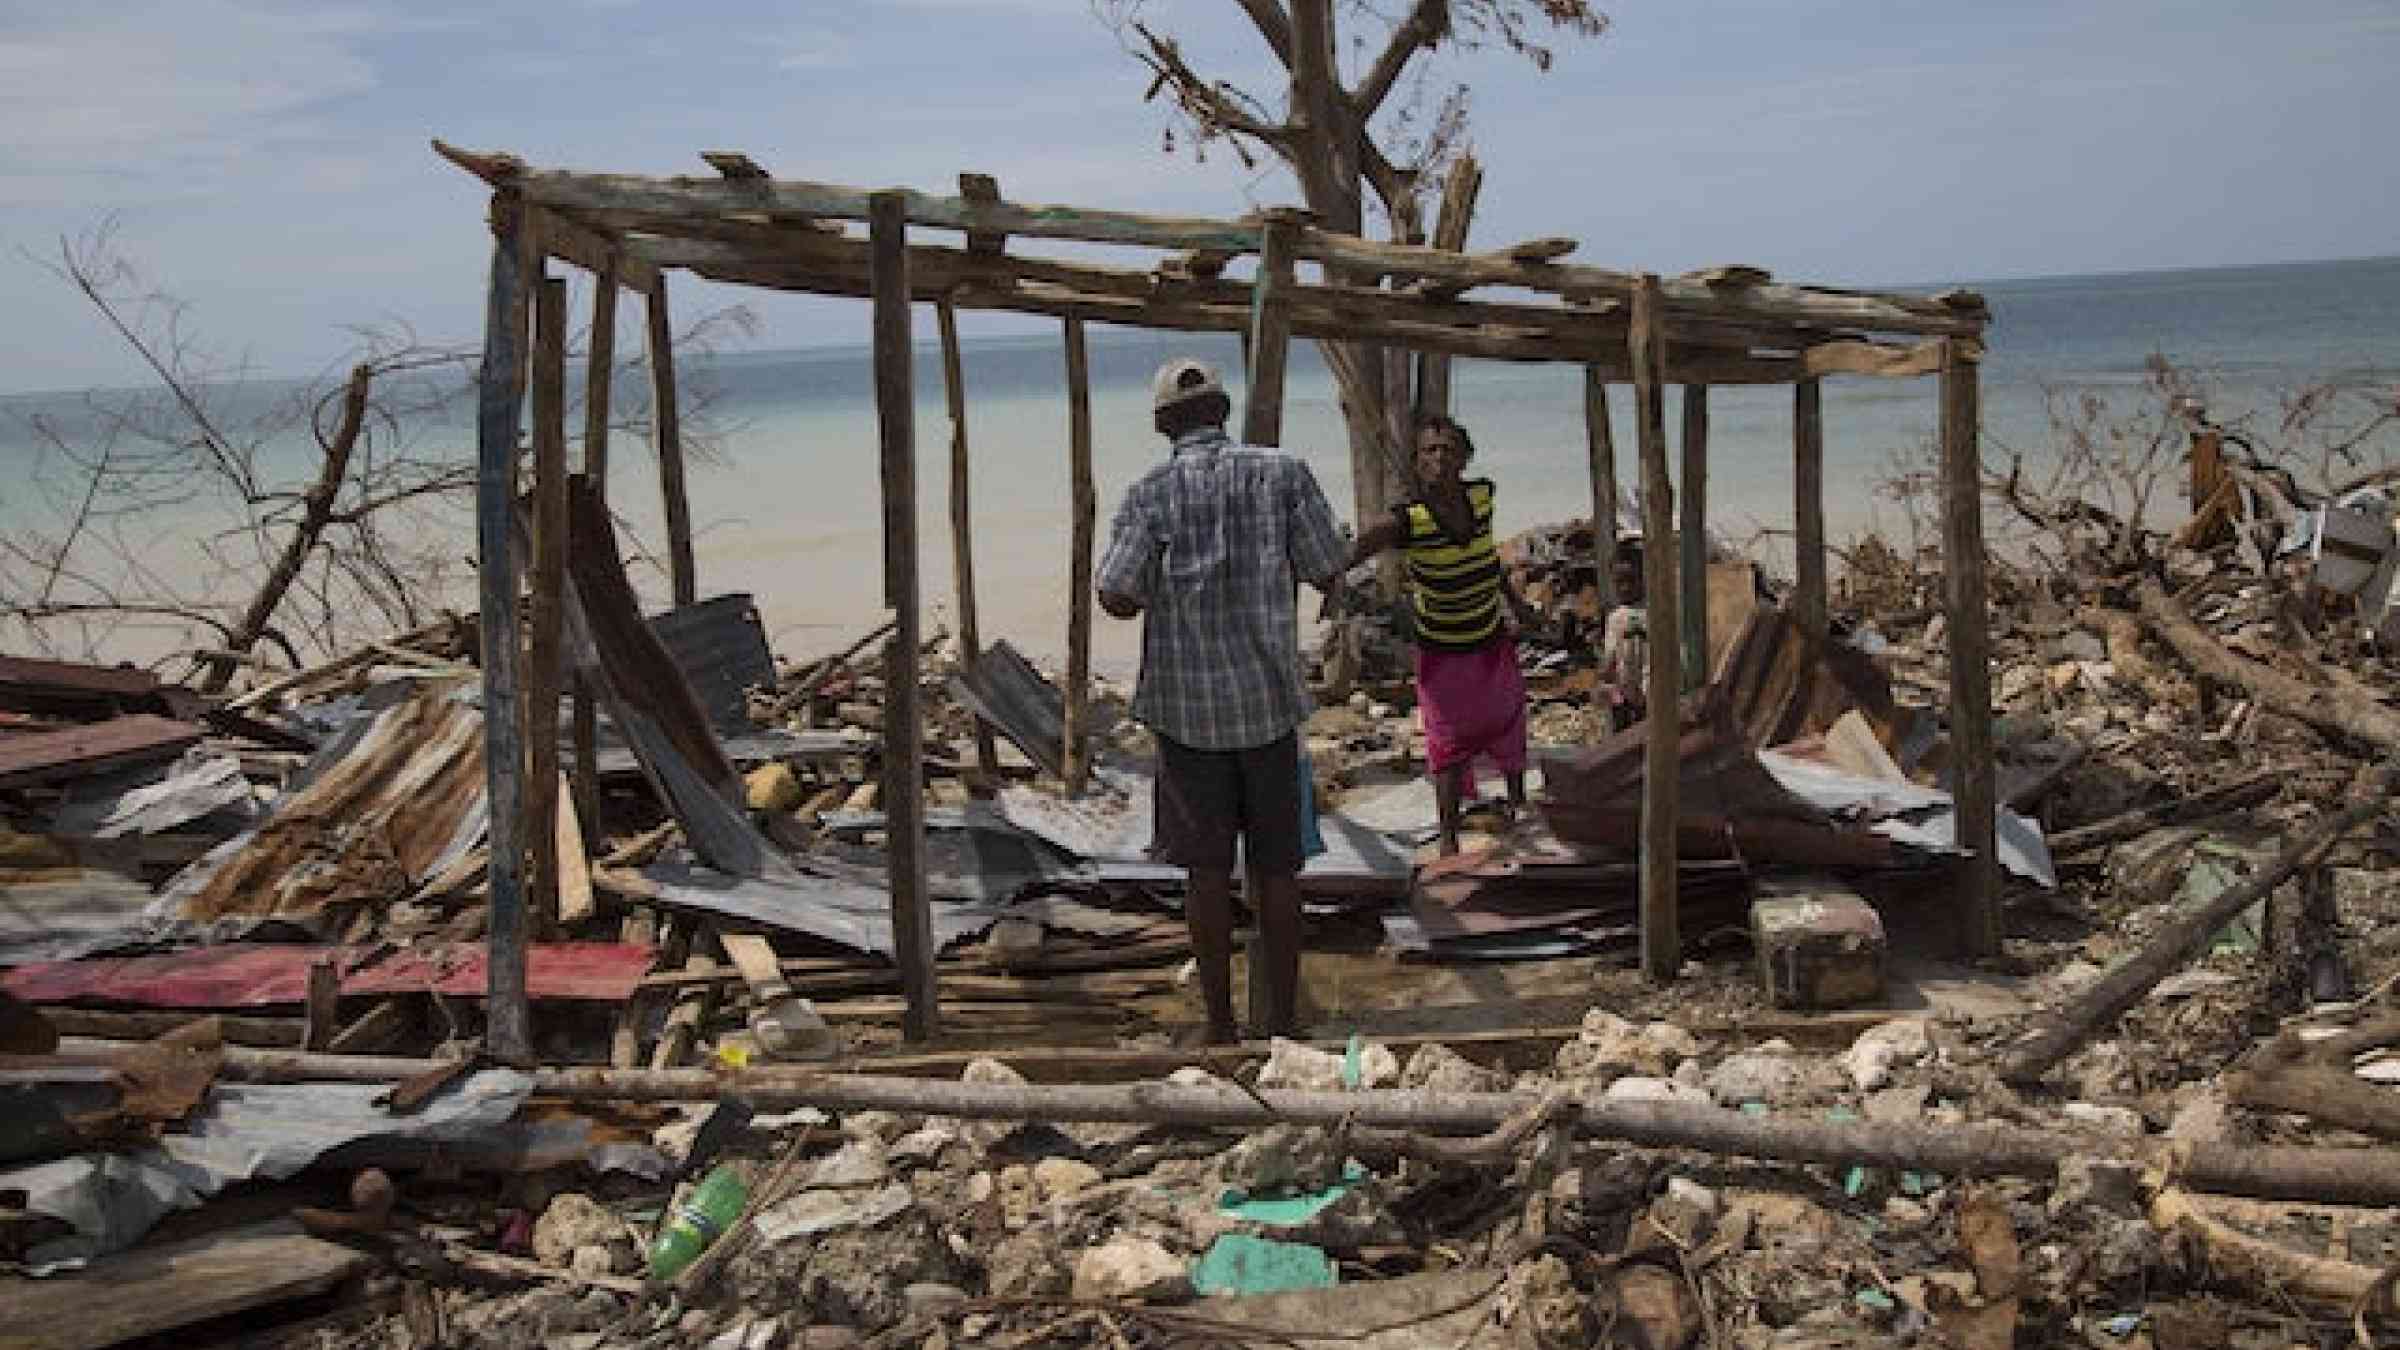 People in a destroyed house following Hurricane Matthew in Roche a Bateux, Haiti in October 2016